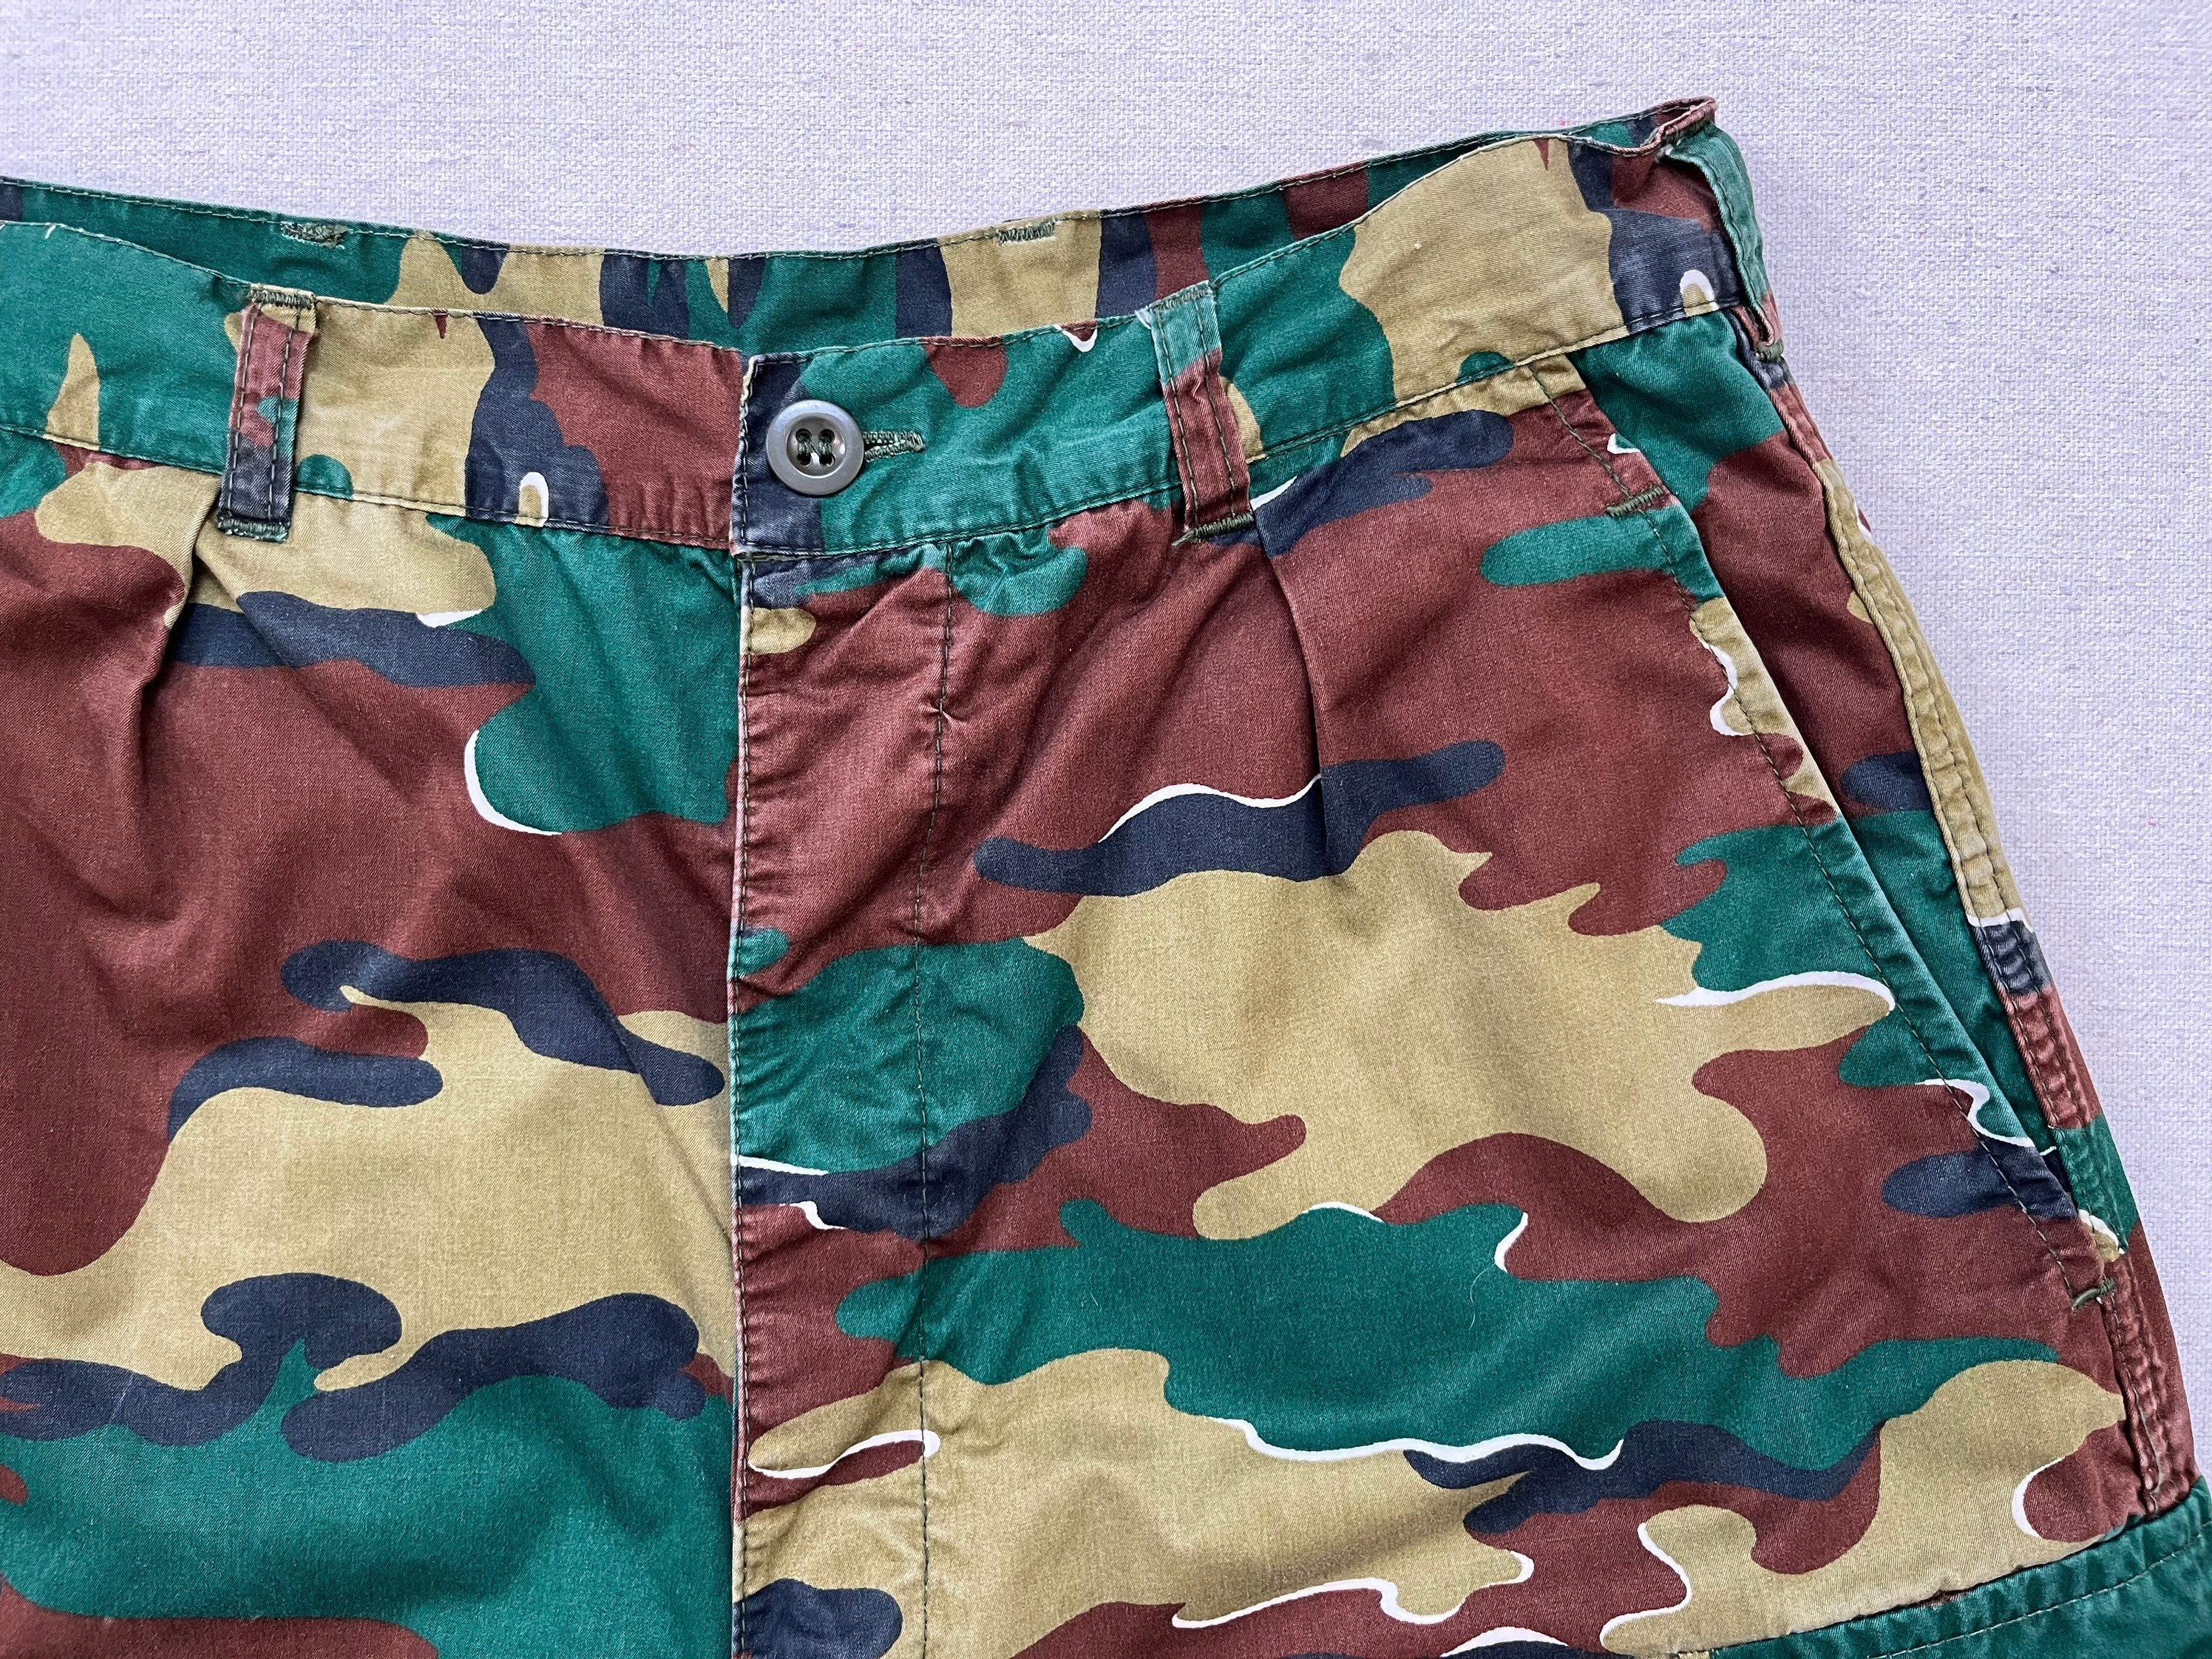 1995 Pleated Front Cargo Pants in Camouflage 